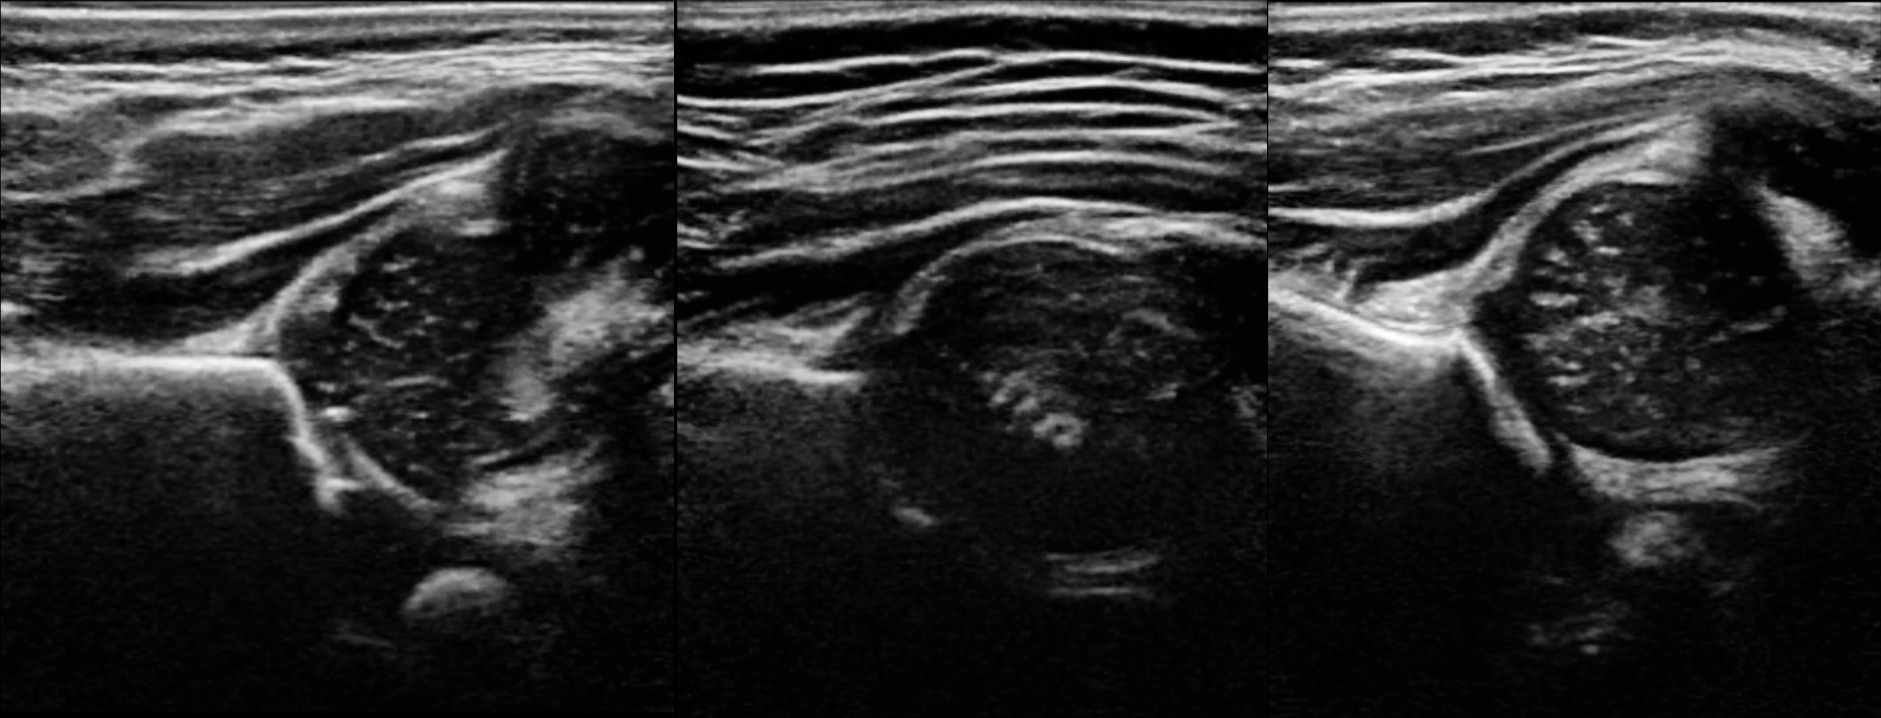 Fig. 2 
          Coronal slices representing examples of included (left) and excluded (middle, right) 3D hip ultrasound scans (3DUS). Left: Slice meets Graf‘s standard plane criteria. Middle: Os ichium is missing in all slices of 3DUS. Right: Iliac wing is not horizontal in any slice of 3DUS.
        